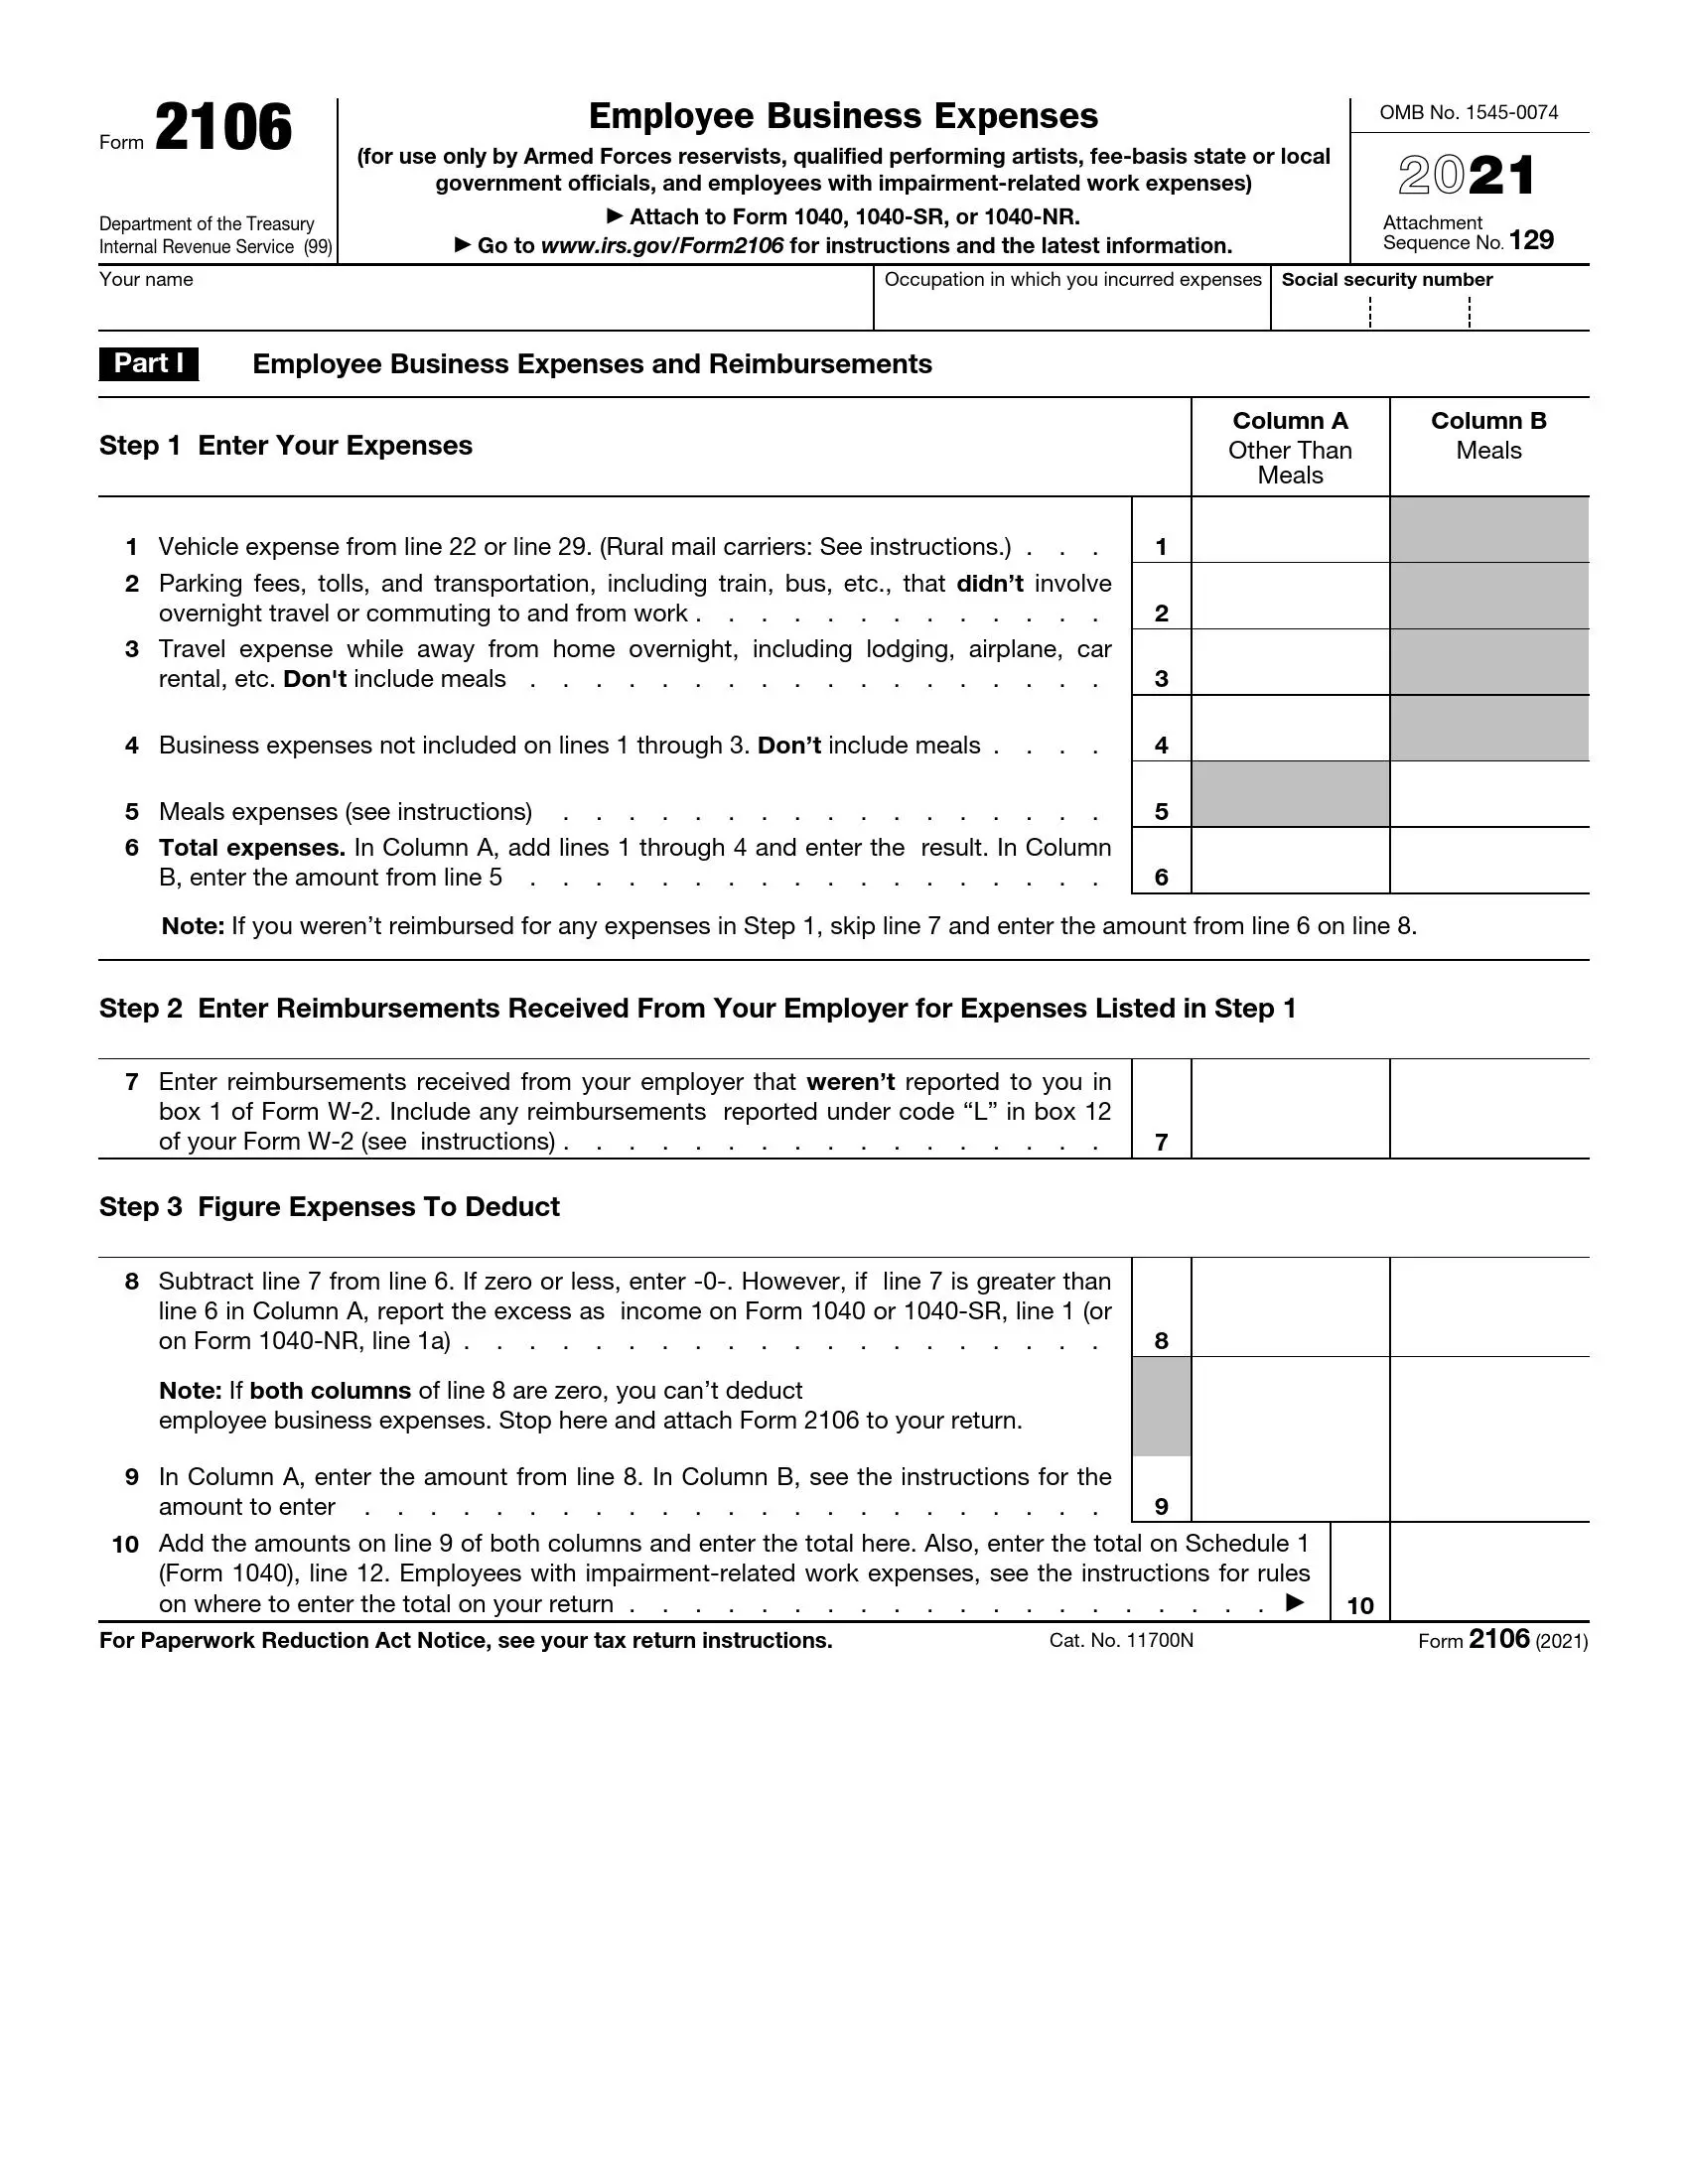 irs form 2106 2021 preview